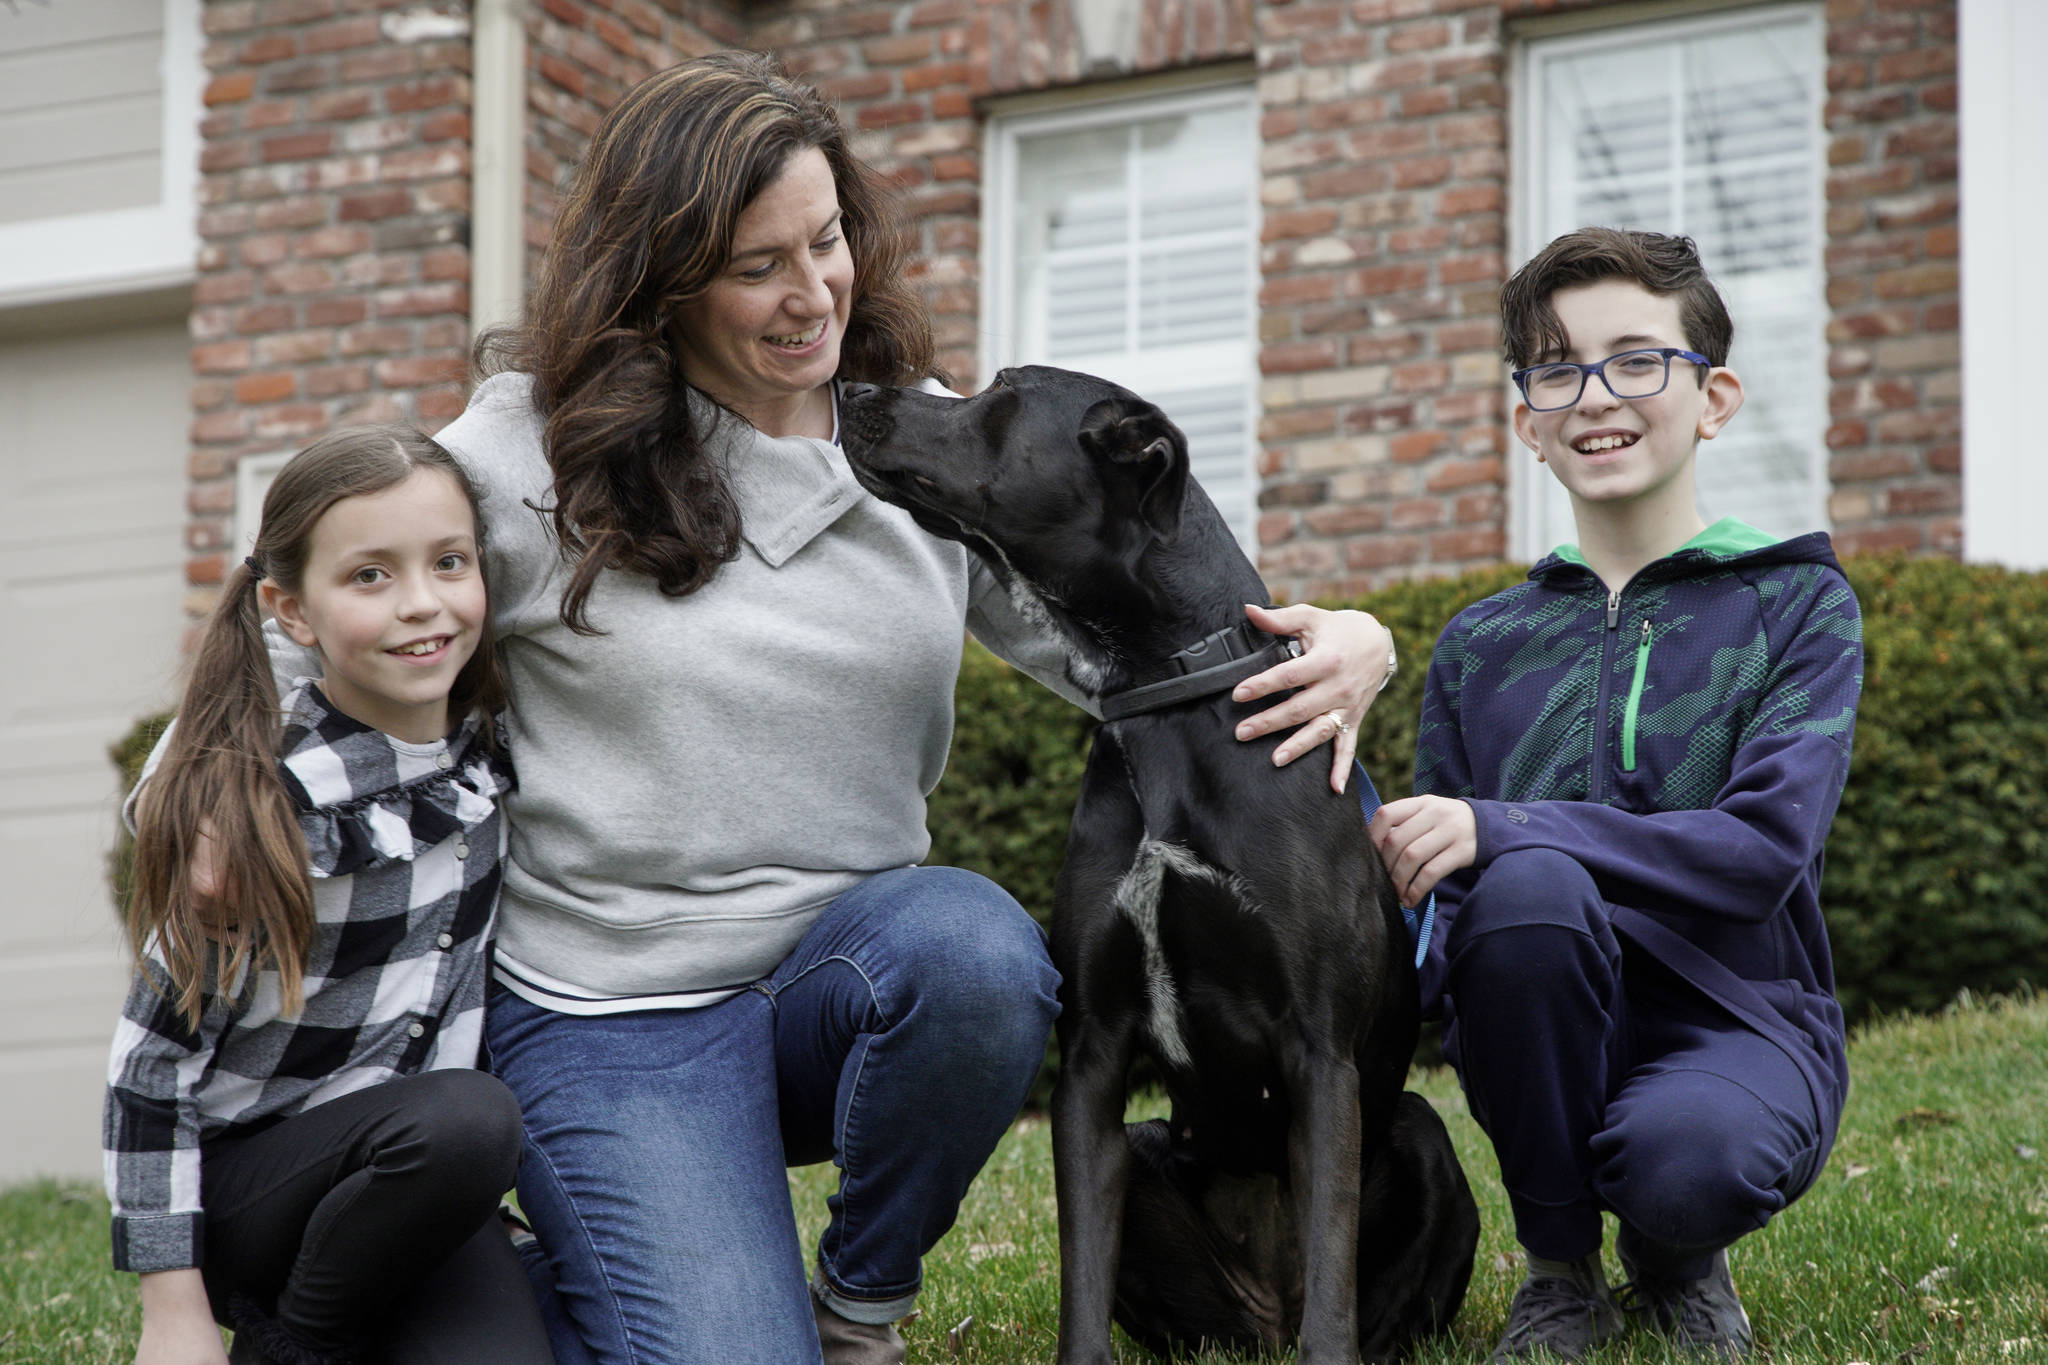 In this March 27, 2020 photo, Kim Simeon and children Annabel, 9, and Brennan, 11, pose for a photo with Nala, a dog they are fostering, in Omaha, Neb. The Simeon family was headed home to Omaha from a much-needed Smoky Mountains vacation when Kim Simeon spotted a social media post from the Nebraska Humane Society, pleading with people to consider fostering a pet. (AP Photo/Nati Harnik)